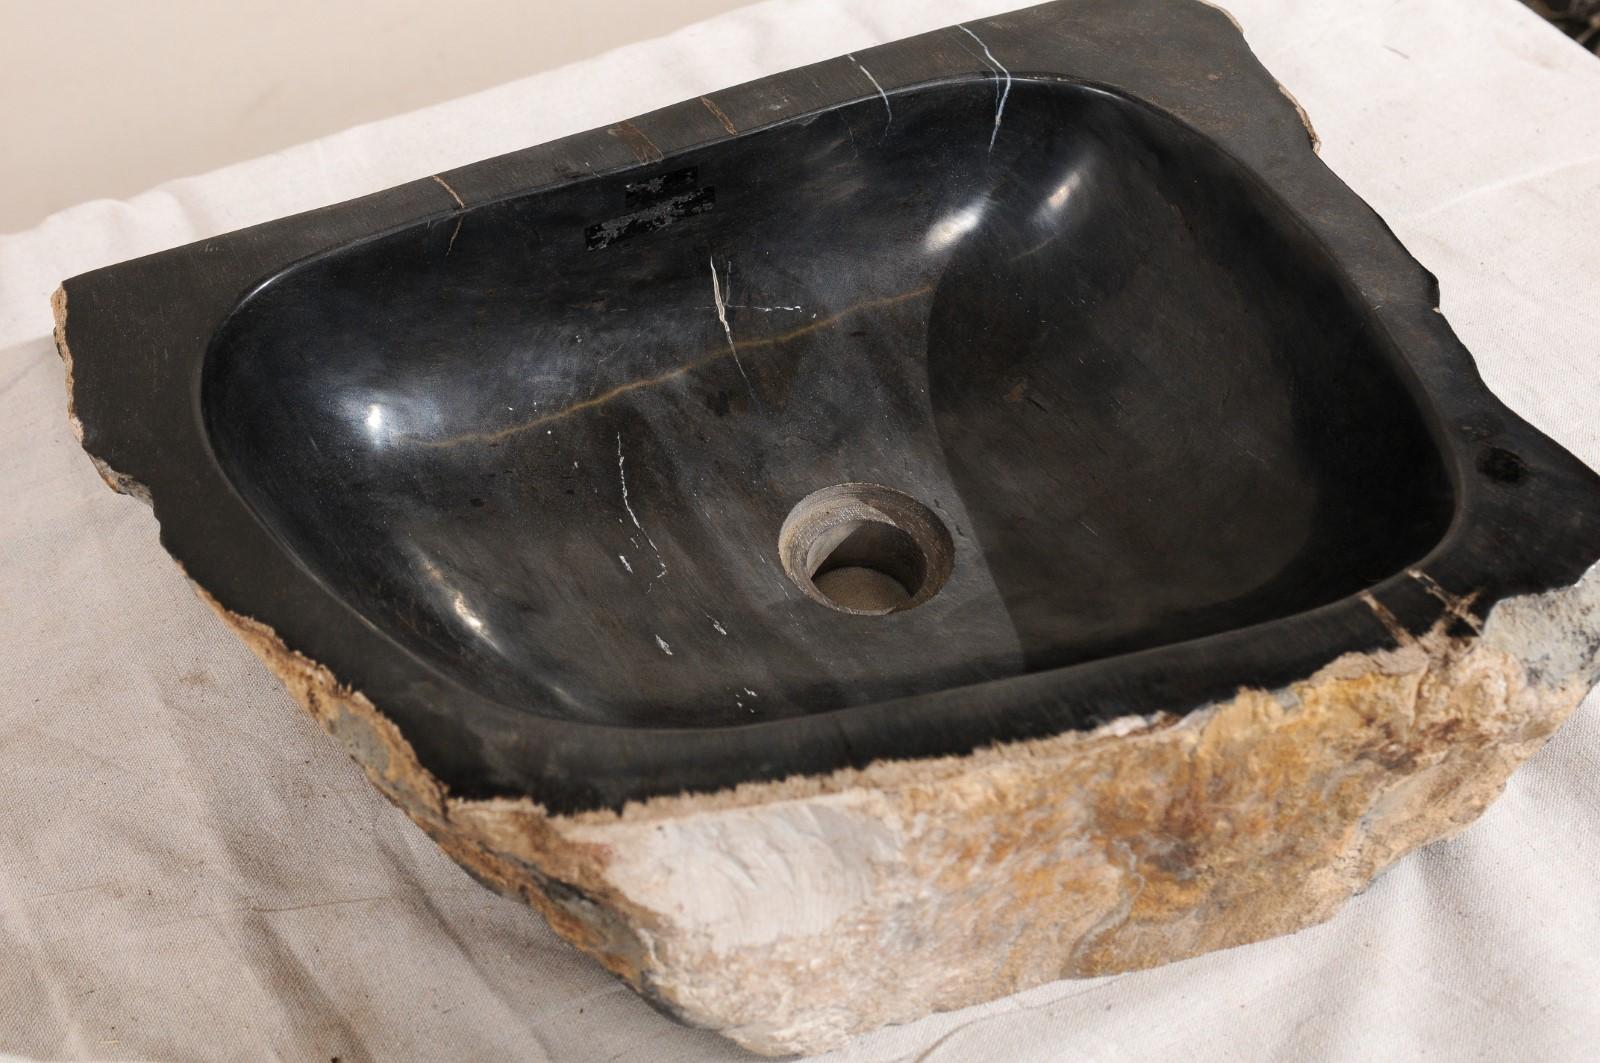 Carved Polished Petrified Wood Sink in Black and Nice Brown Tones